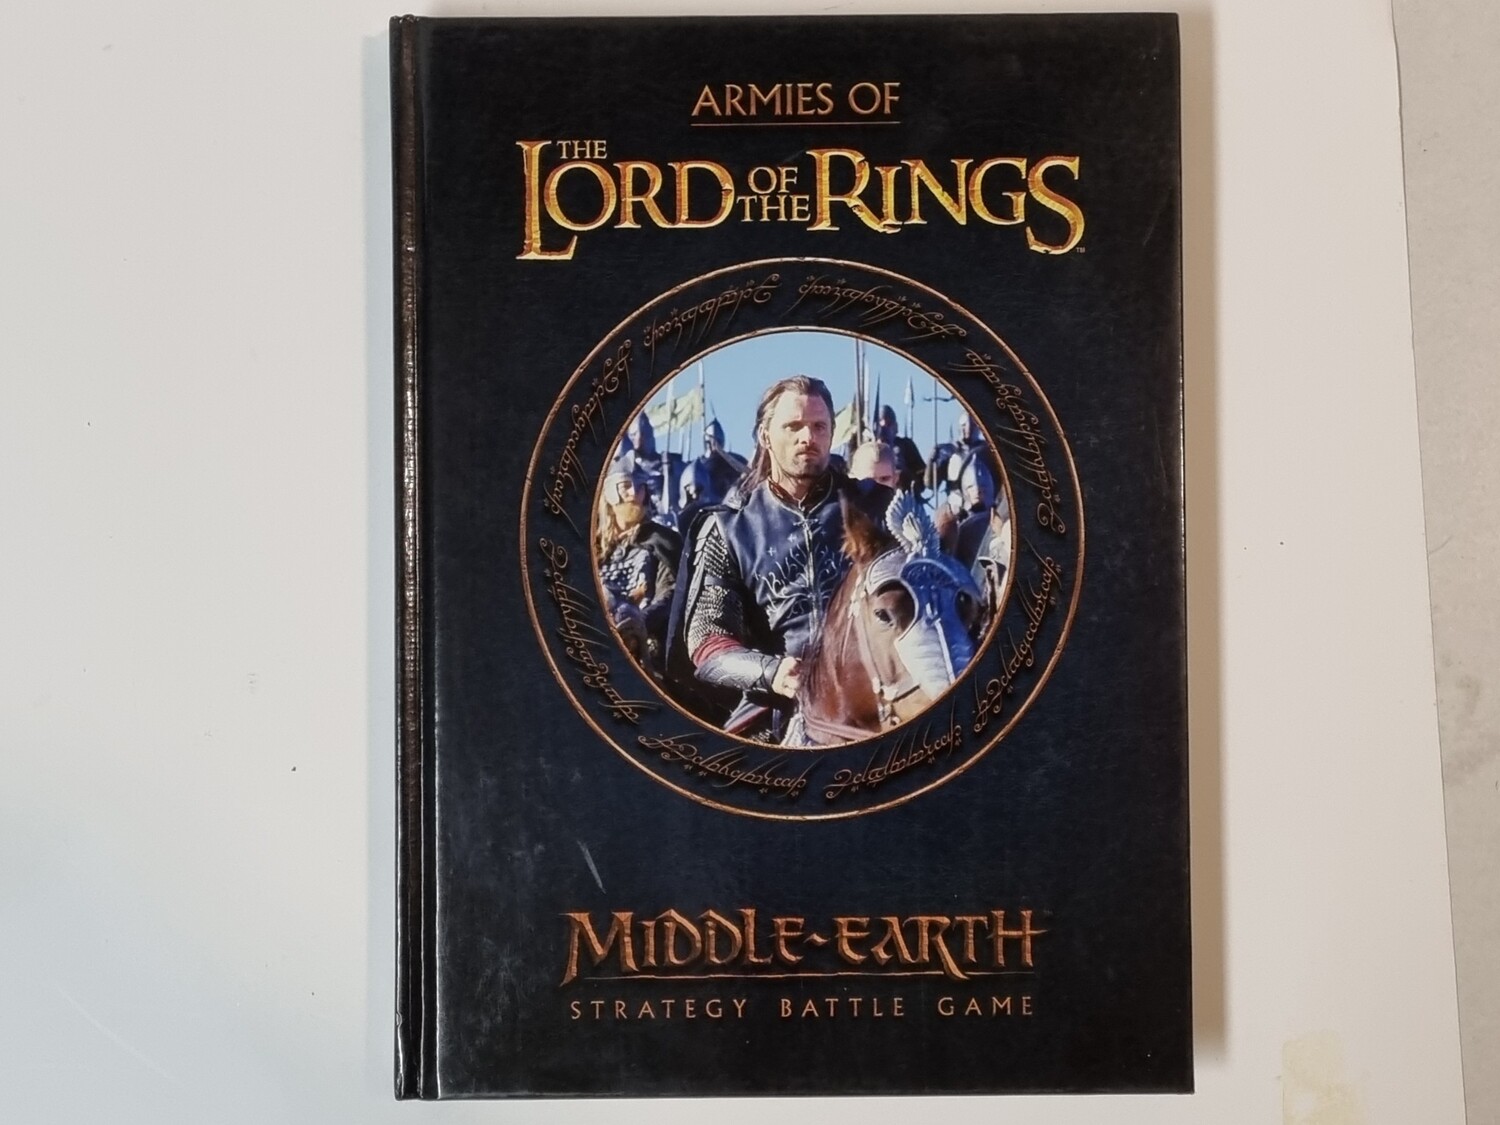 Middle-Earth, Armies of Lord of the Rings, Strategy Battle Game